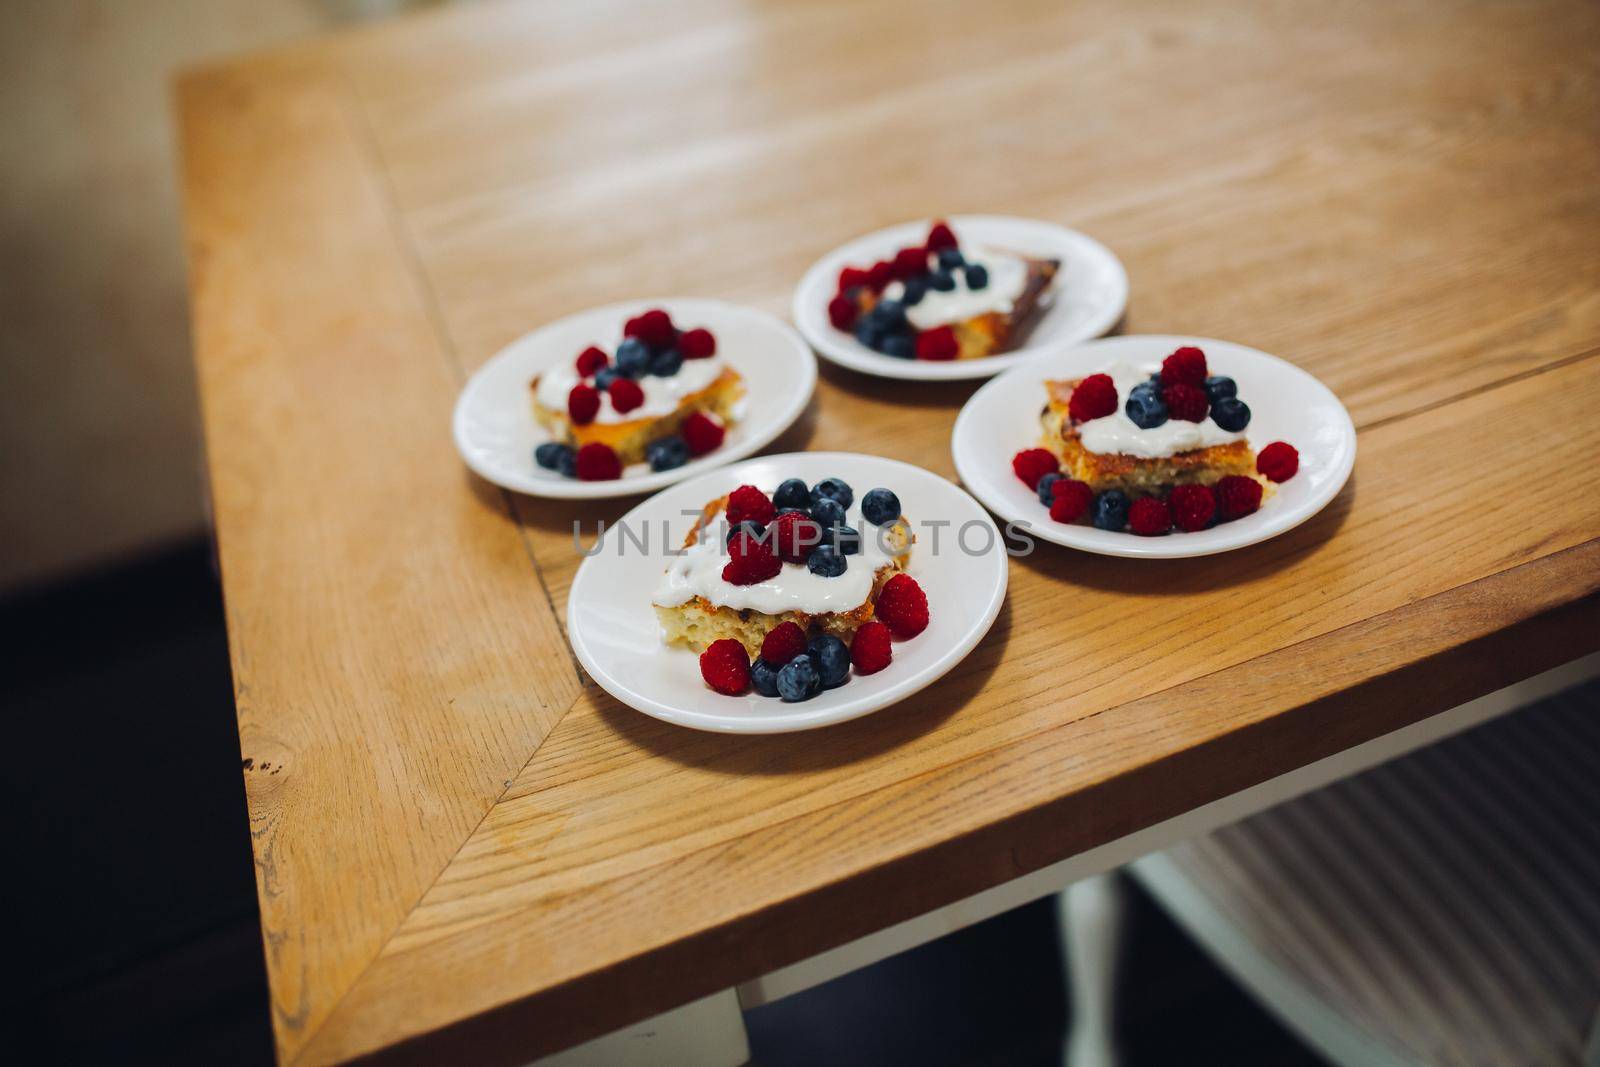 View of tasty and fresh breakfast in cafe, four portion of sweet bake with different berries. Home made desert with raspberry, blueberry and cream on wooden table. Concept of family breakfast.